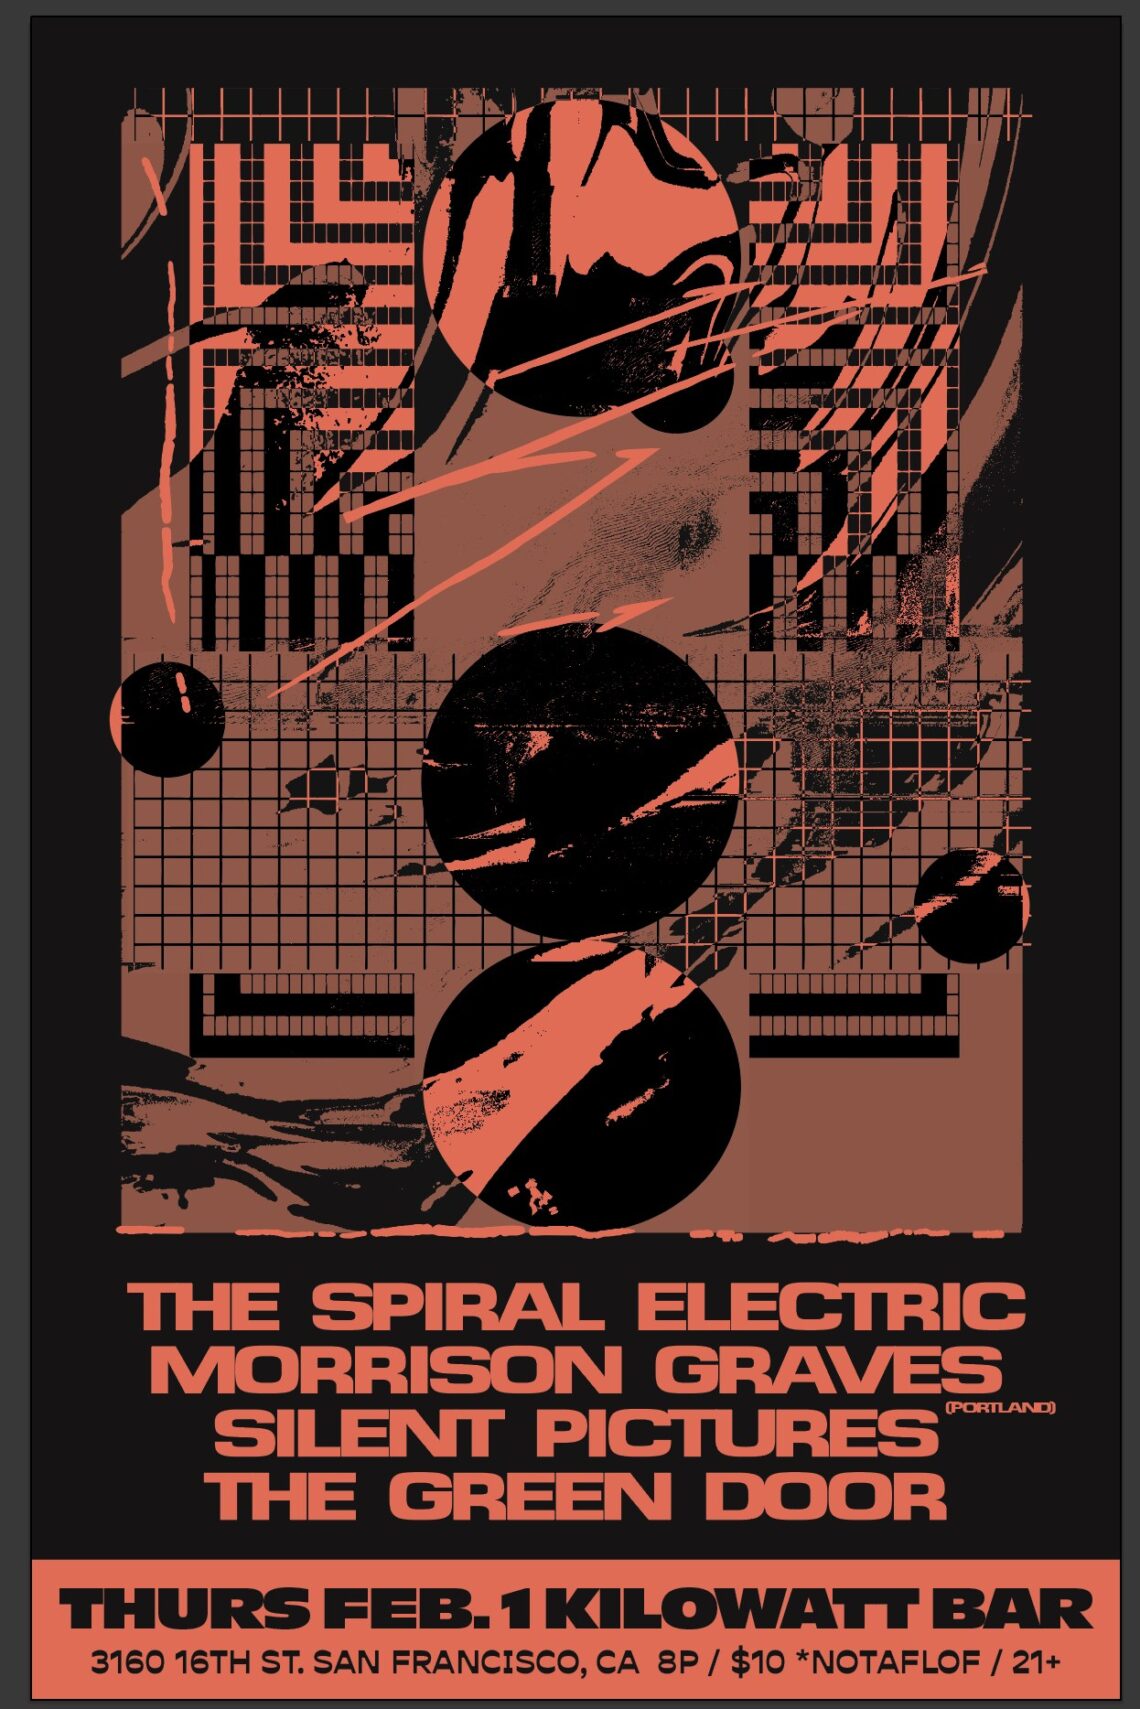 A night of cosmic exploration featuring: THE SPIRAL ELECTRIC (heavy melodic psych) MORRISON GRAVES (psych rock) SILENT PICTURES (post-punk / psych) THE GREEN DOOR (western psych)